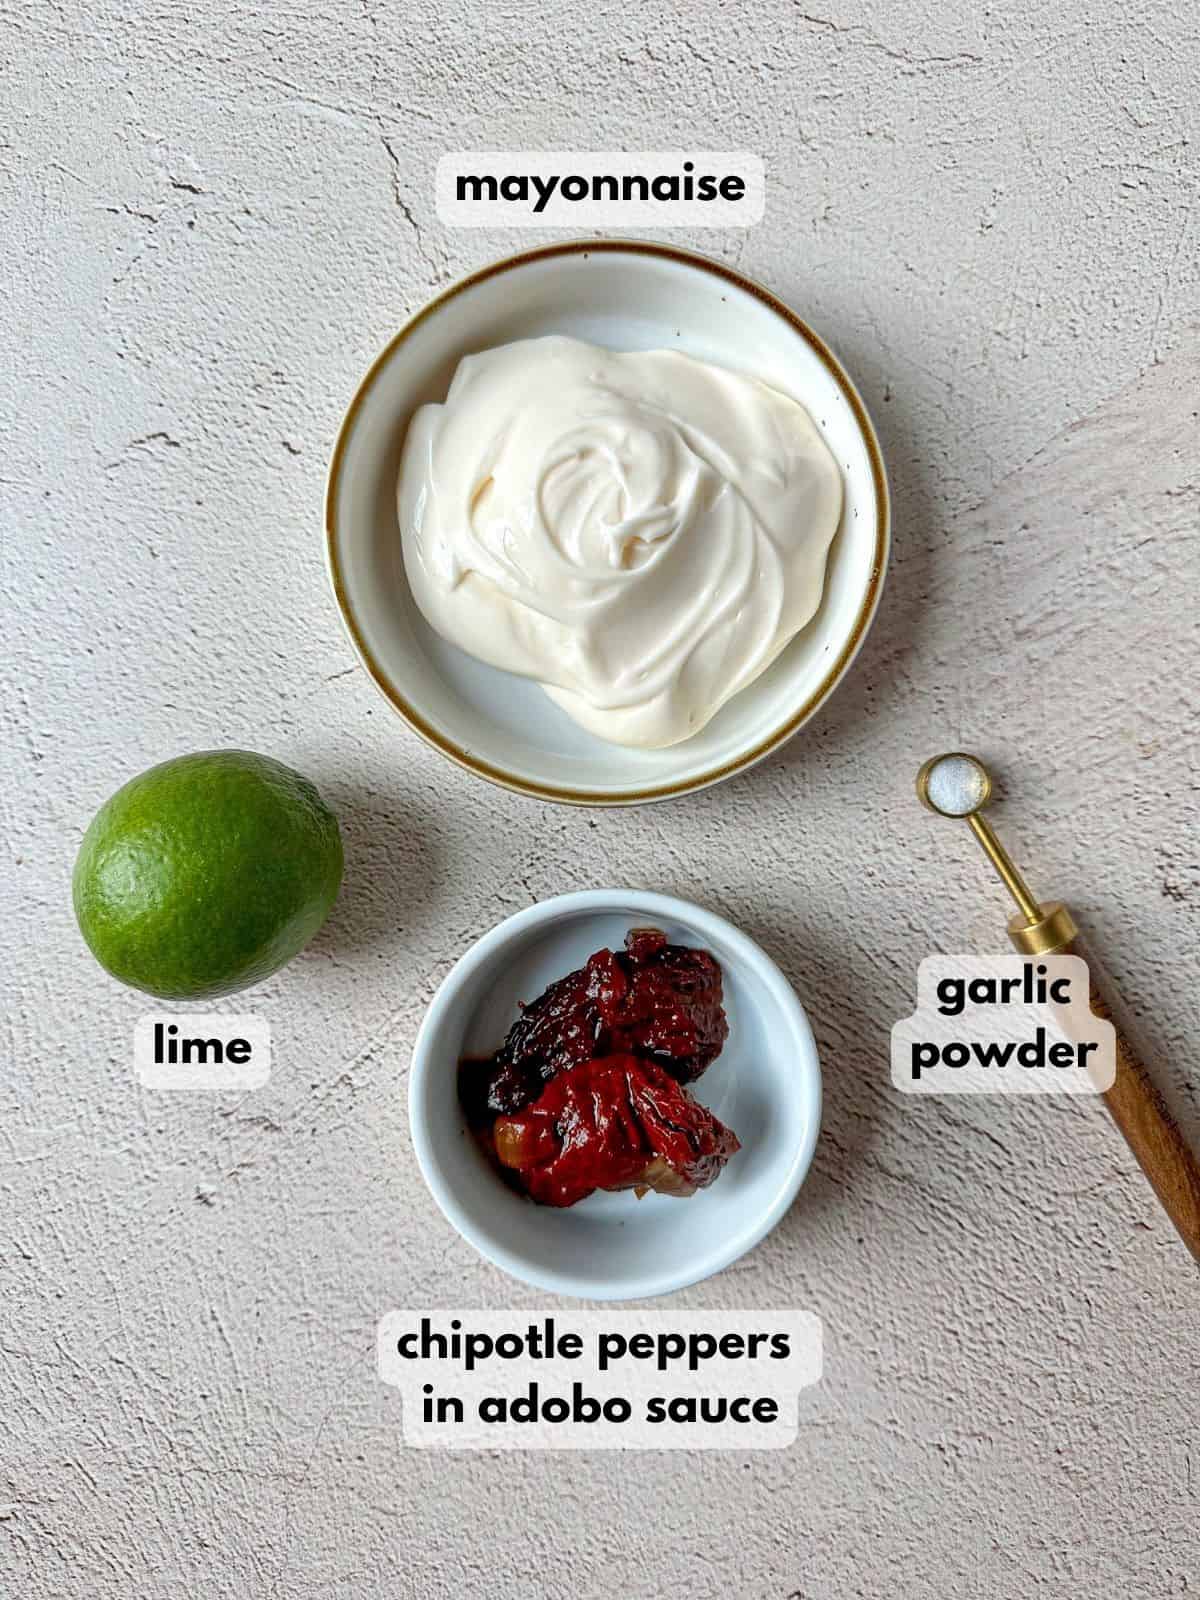 Ingredients needed to make this spicy sauce on a textured table: mayonnaise, whole lime, chipotle peppers in adobo sauce, and a measuring spoon of garlic powder. 